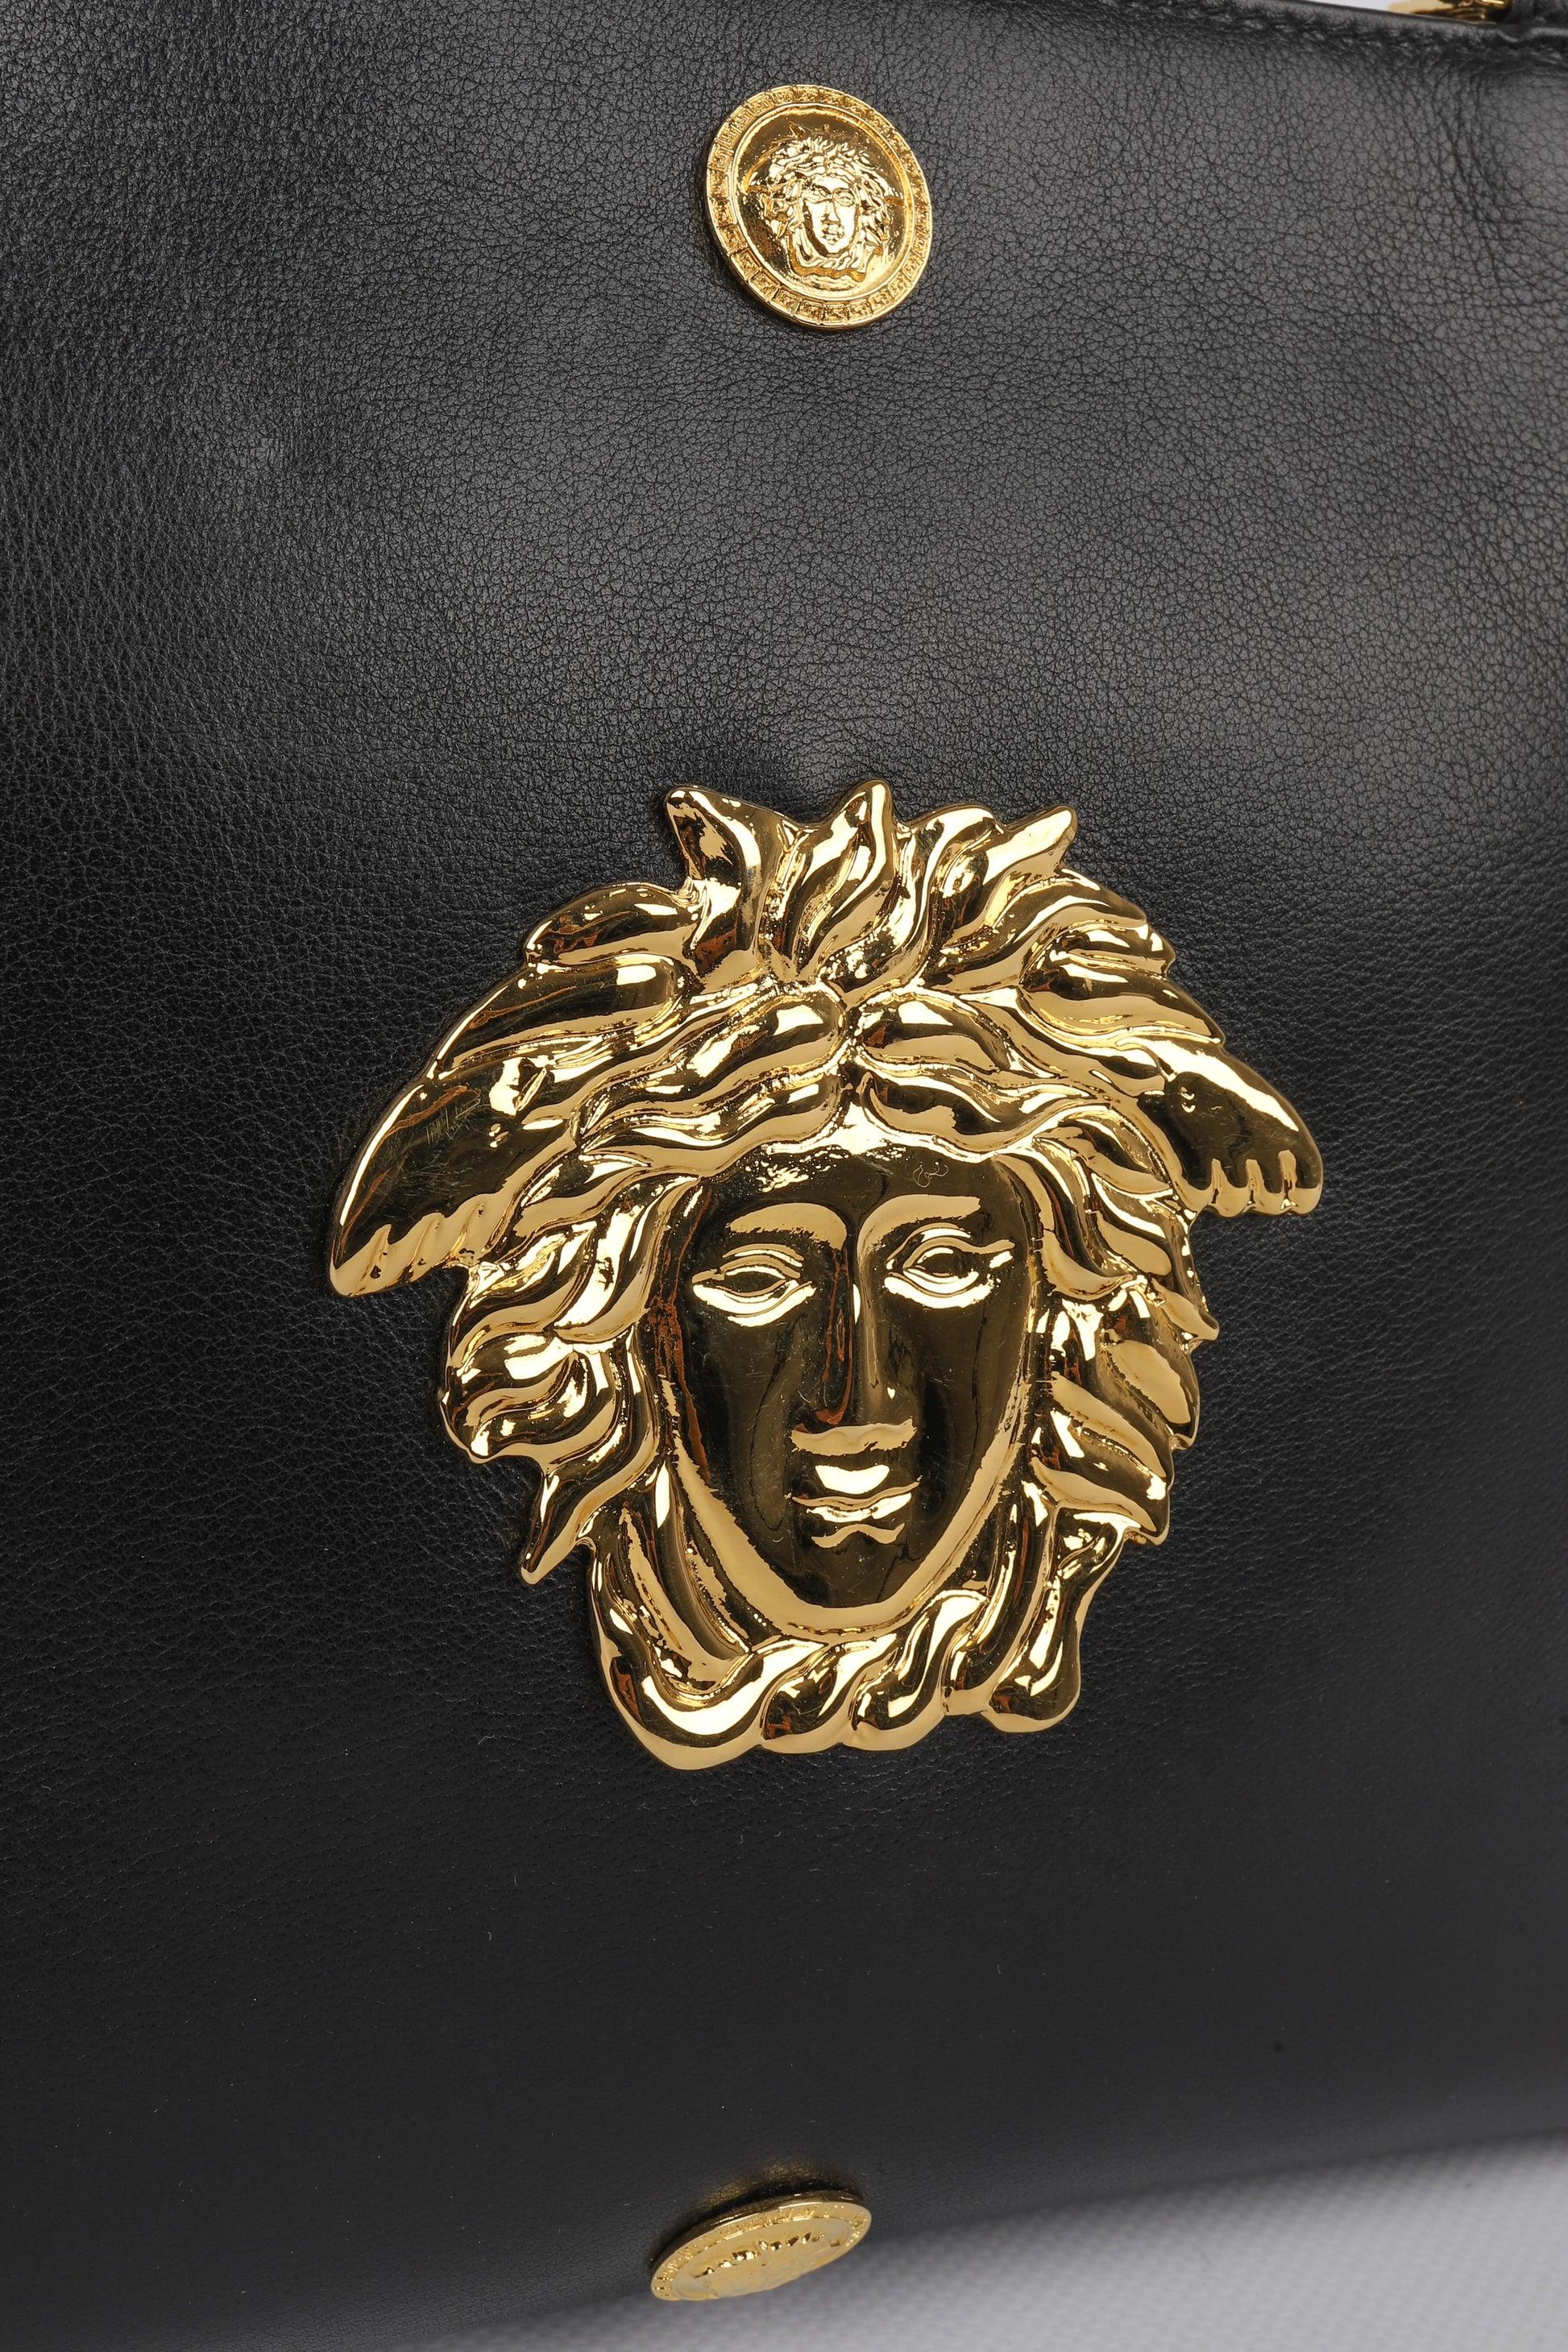 Gianni Versace Black Leather Bag with Golden Metal Elements 1